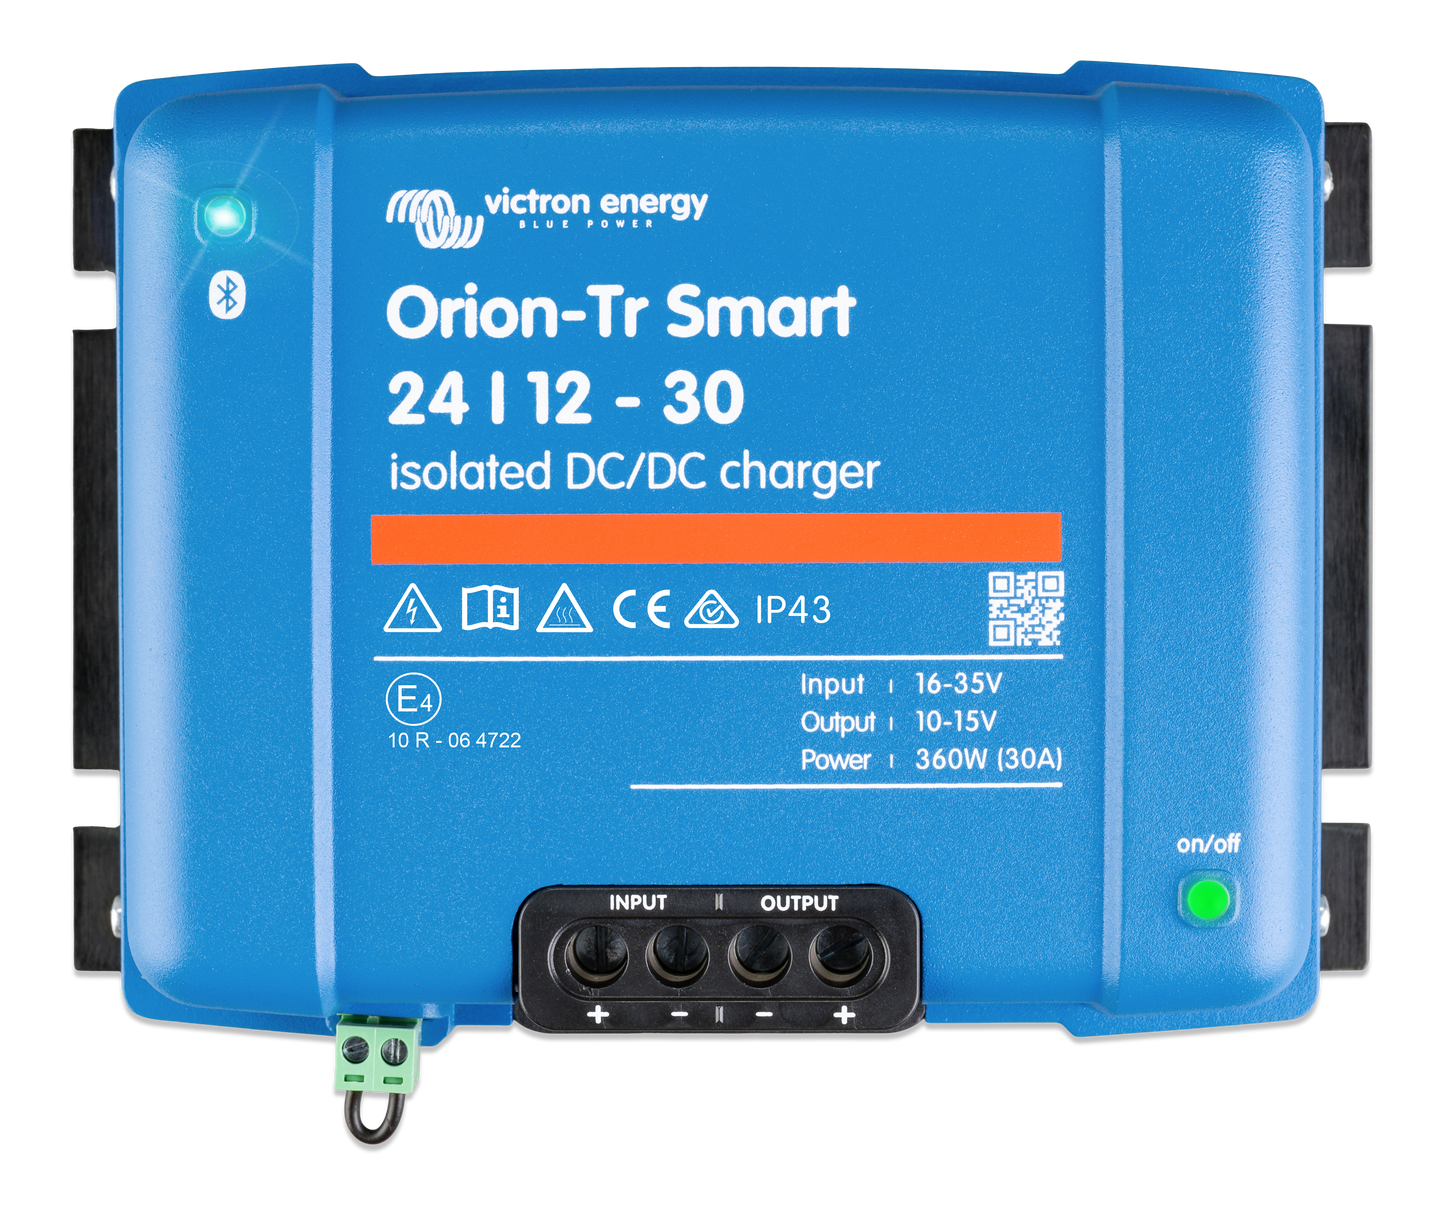 Victron DC-DC Charger ORI241236120 Orion-Tr Smart 24/12-30A (360W) Isolated DC-DC charger